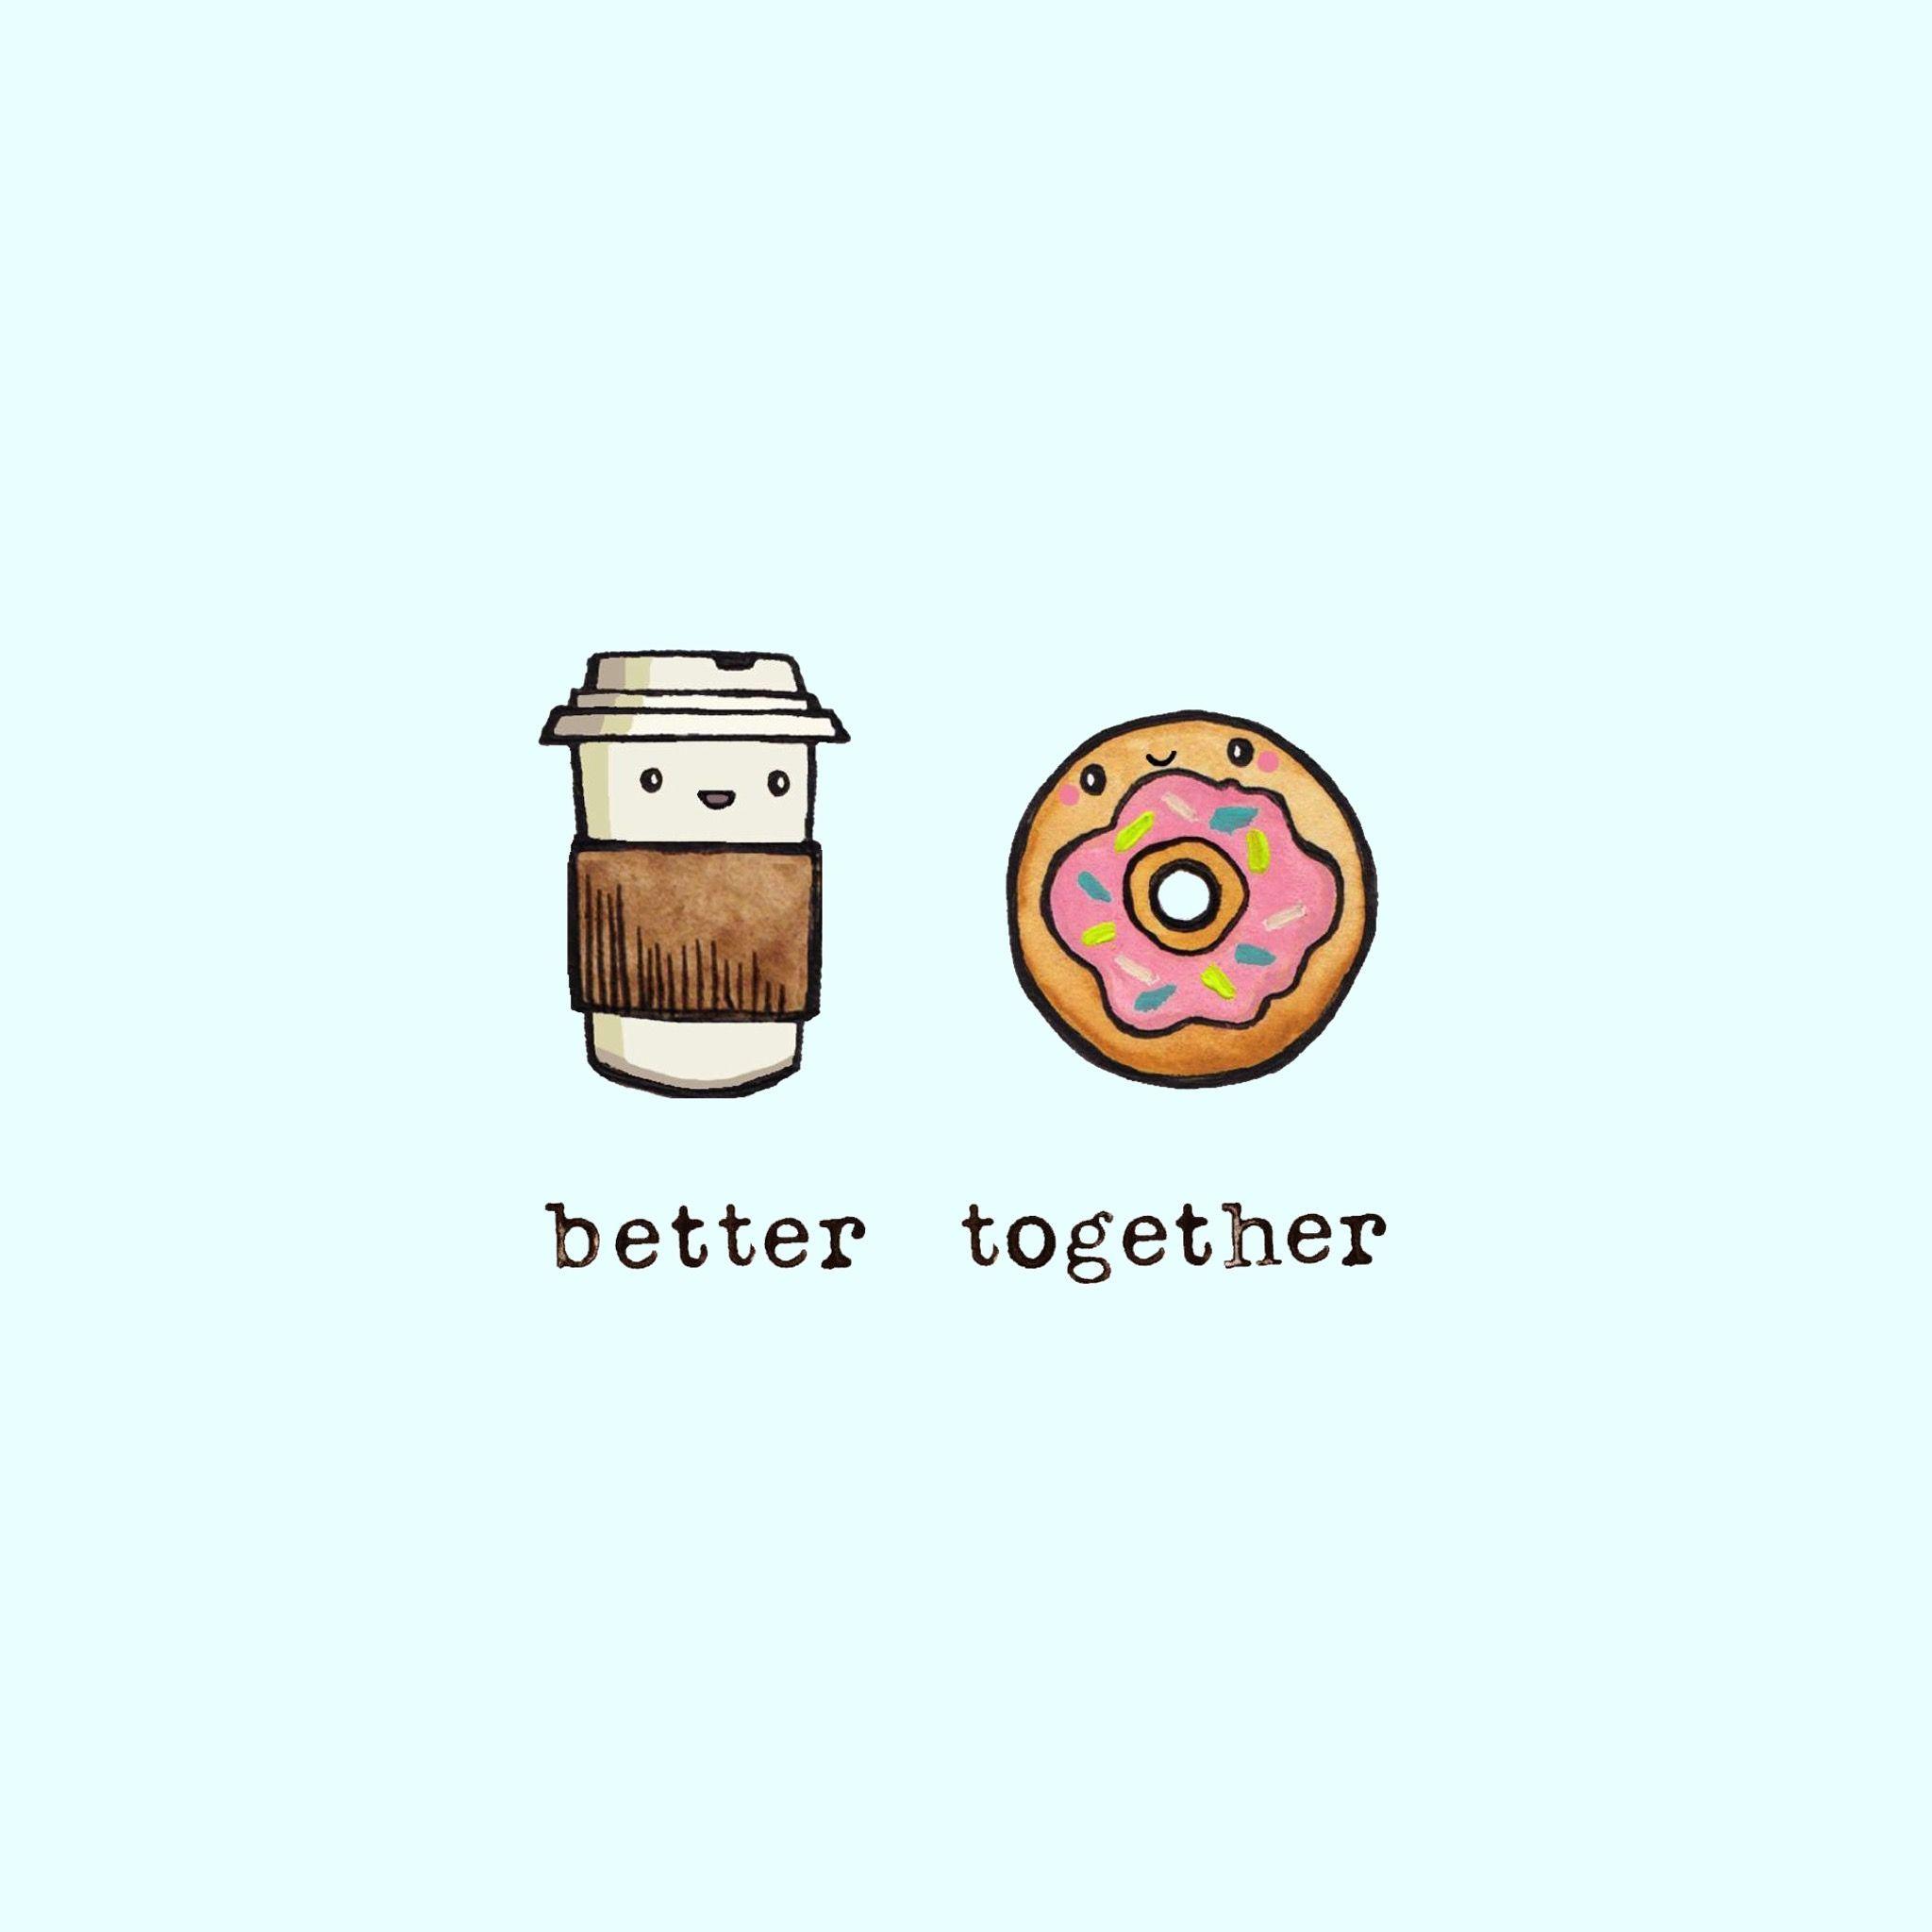 Better together wallpapers